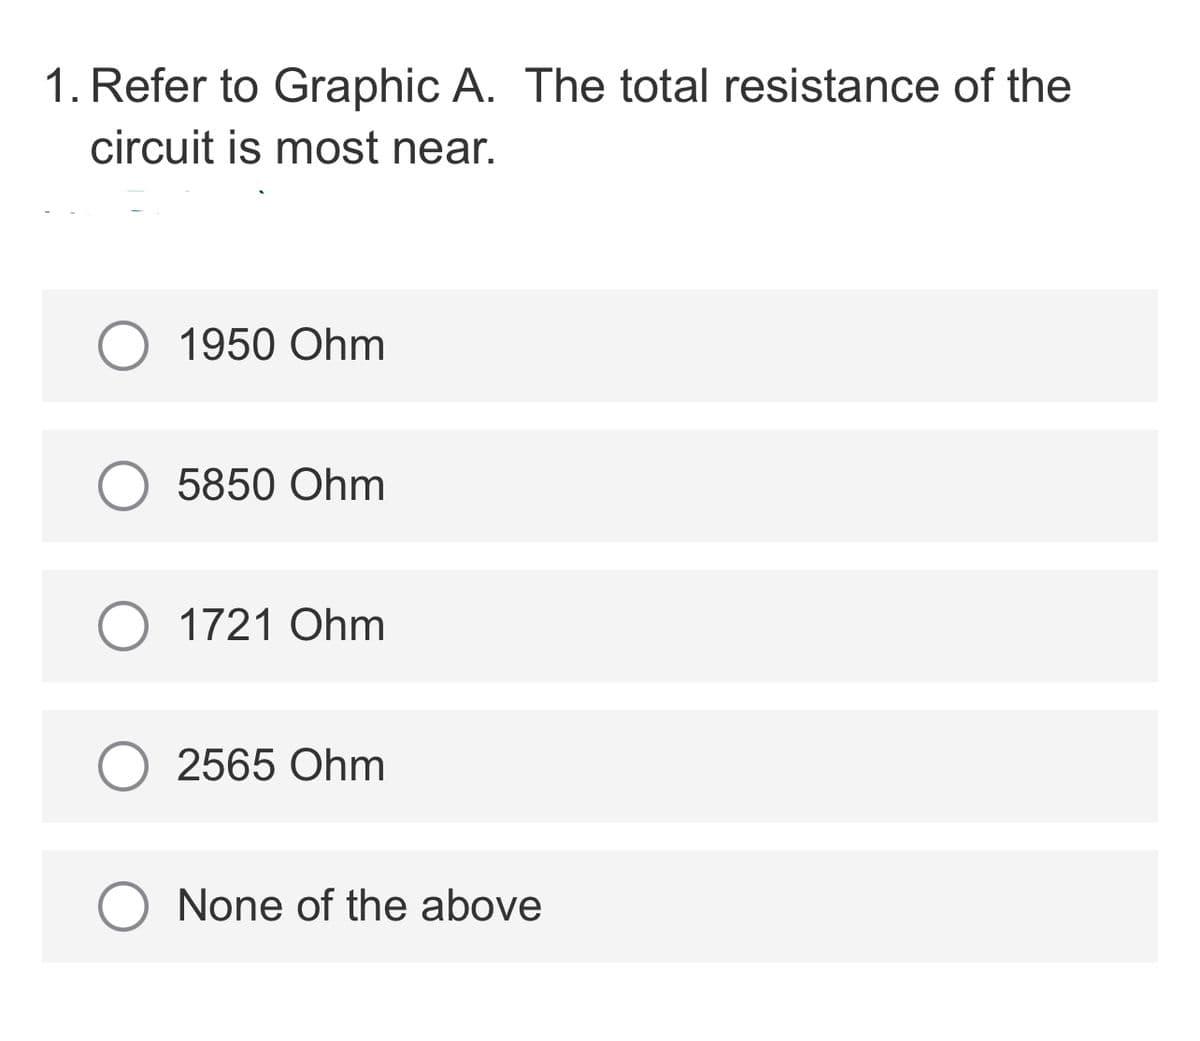 1. Refer to Graphic A. The total resistance of the
circuit is most near.
1950 Ohm
5850 Ohm
1721 Ohm
2565 Ohm
None of the above
